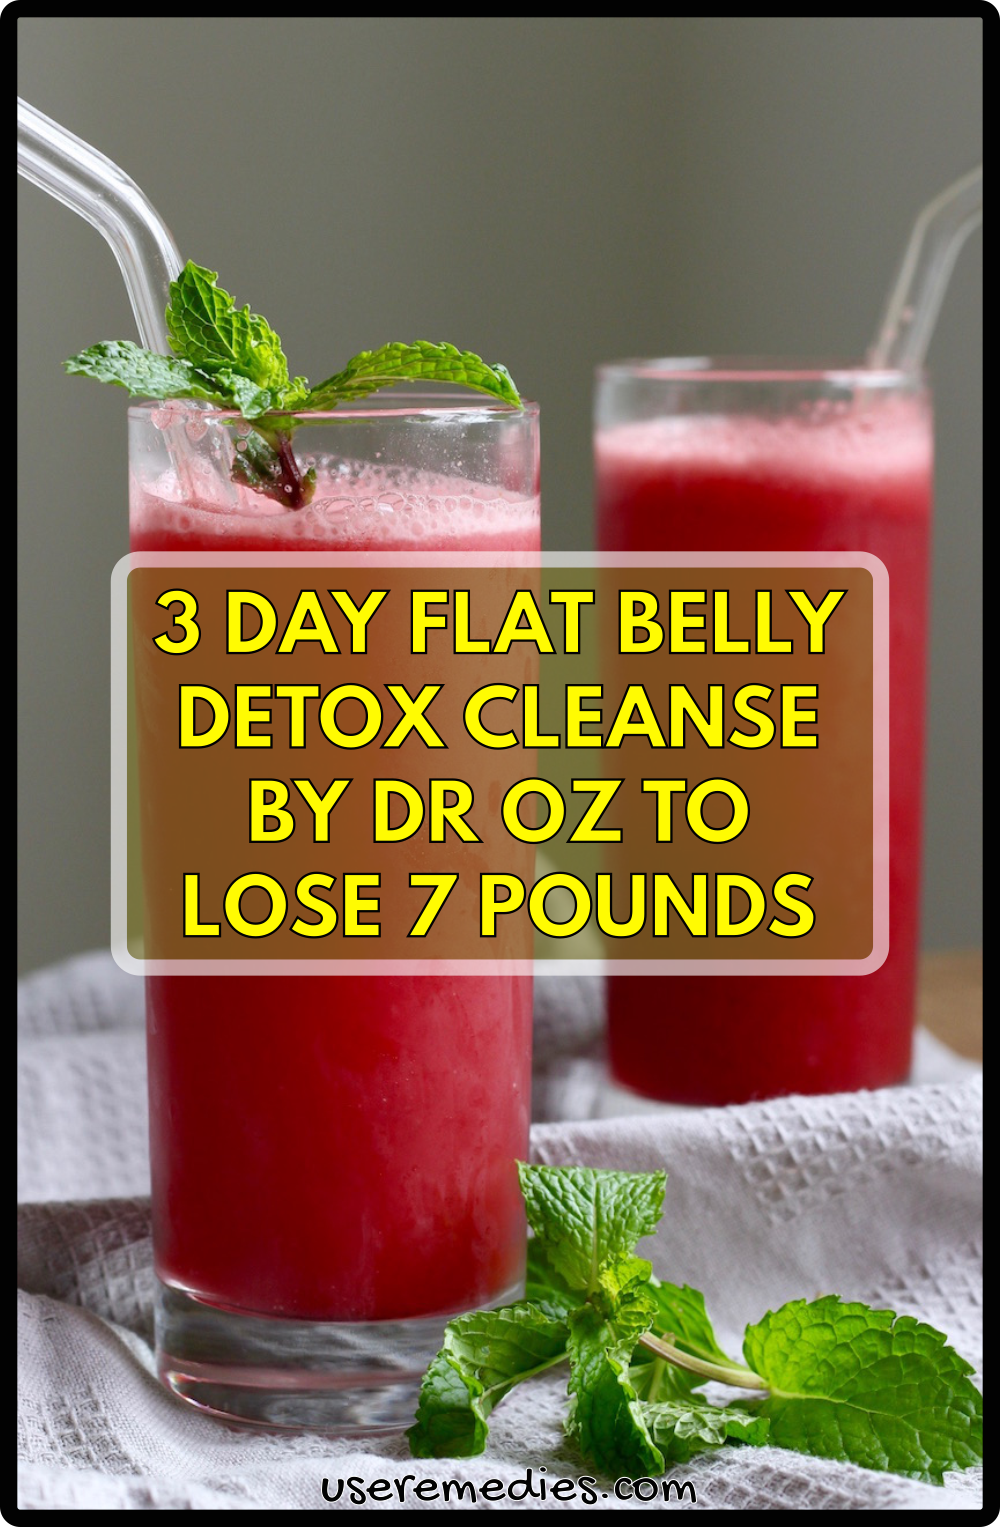 3 Day Flat Belly Detox Cleanse By Dr Oz To Lose 7 Pounds Weight Loss 